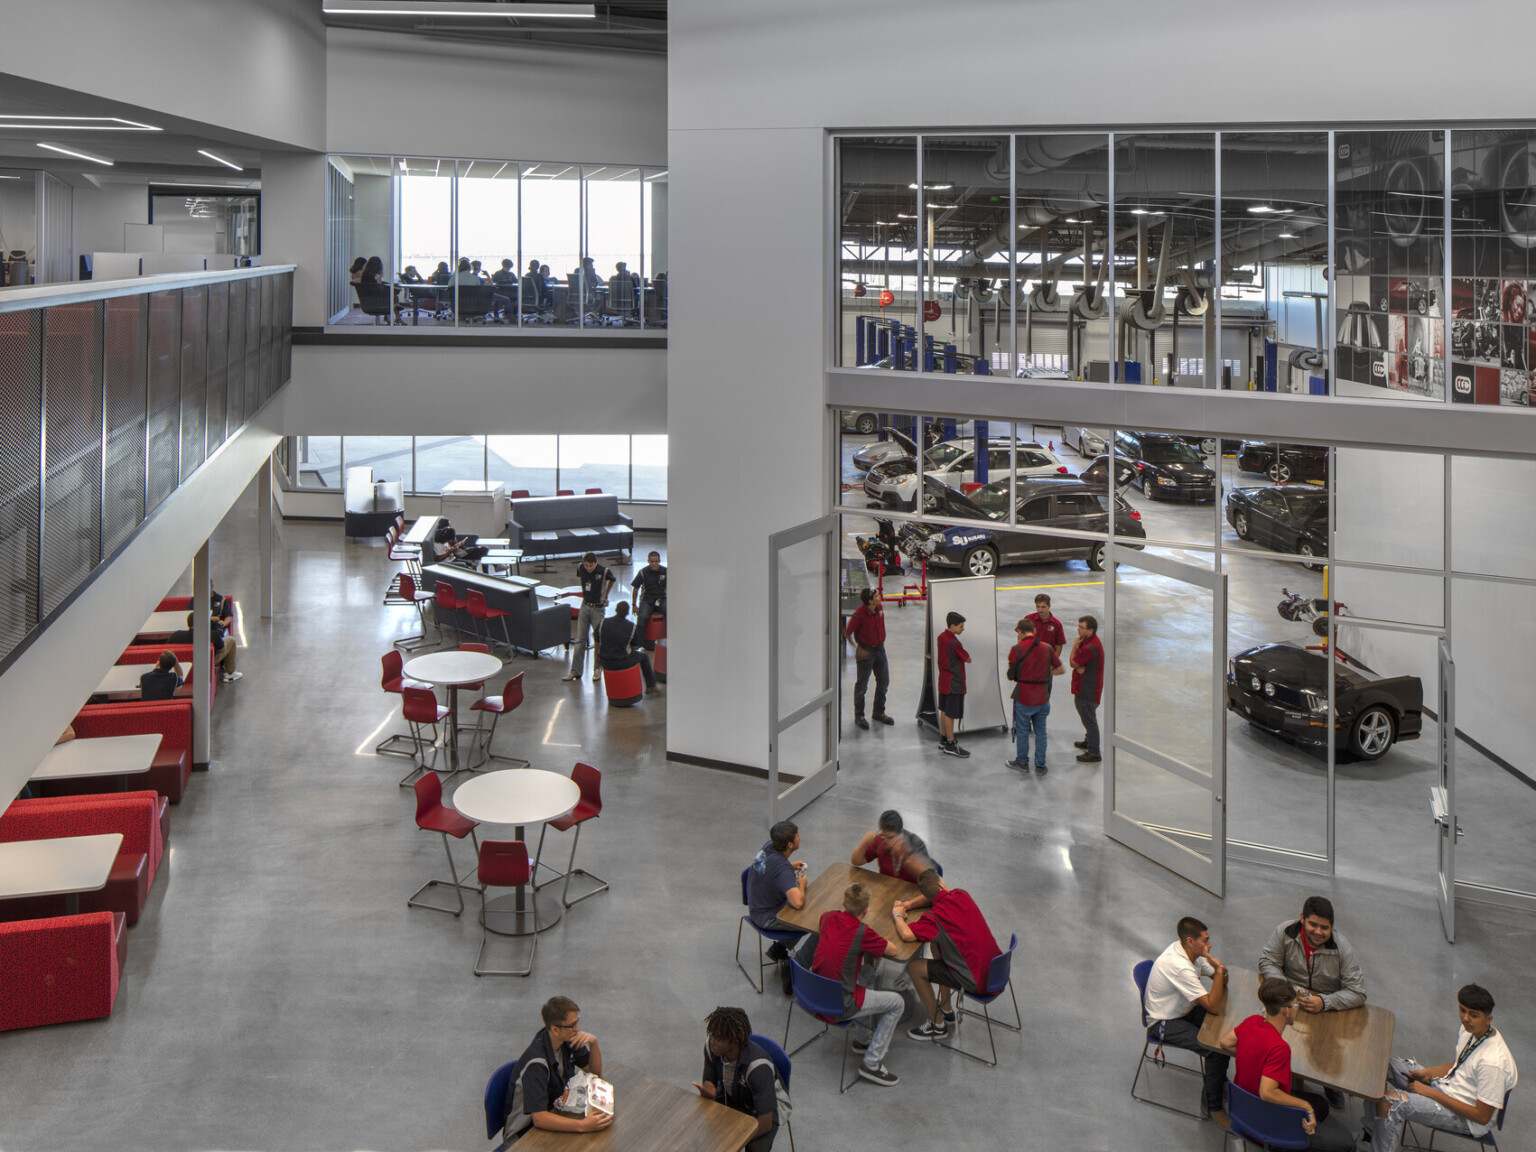 View from 2nd floor balcony overlooking seating and glass entrance to double height auto industry and mechanic specific lab